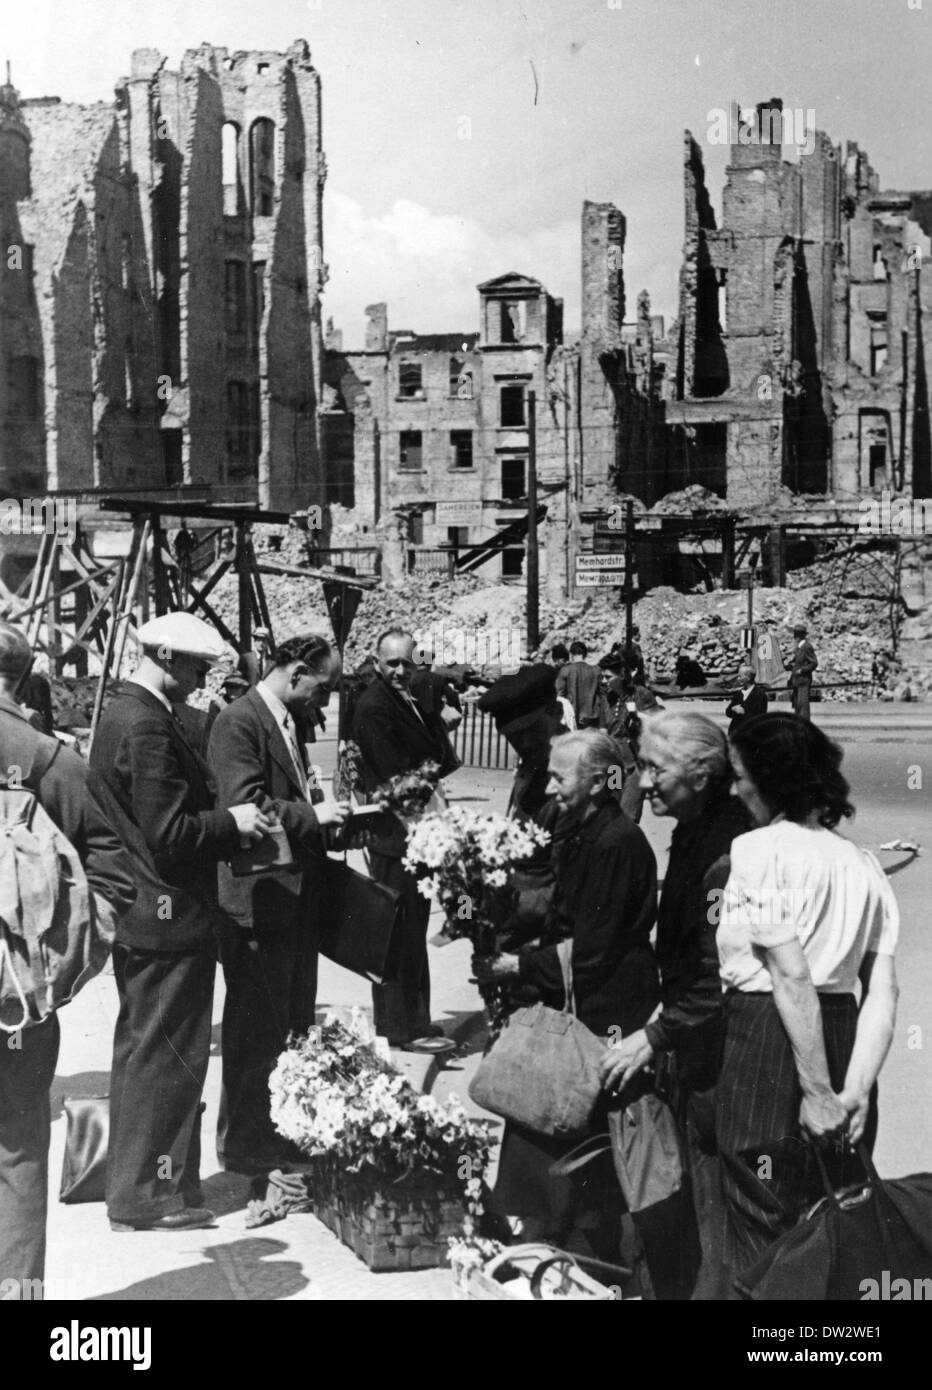 People return to normality in an abnormal environment - Women sell flowers in front of the ruins of houses on Memhardstrasse street near Alexanderplatz in Berlin, May 1945. Fotoarchiv für Zeitgeschichte - NO WIRE SERVICE Stock Photo